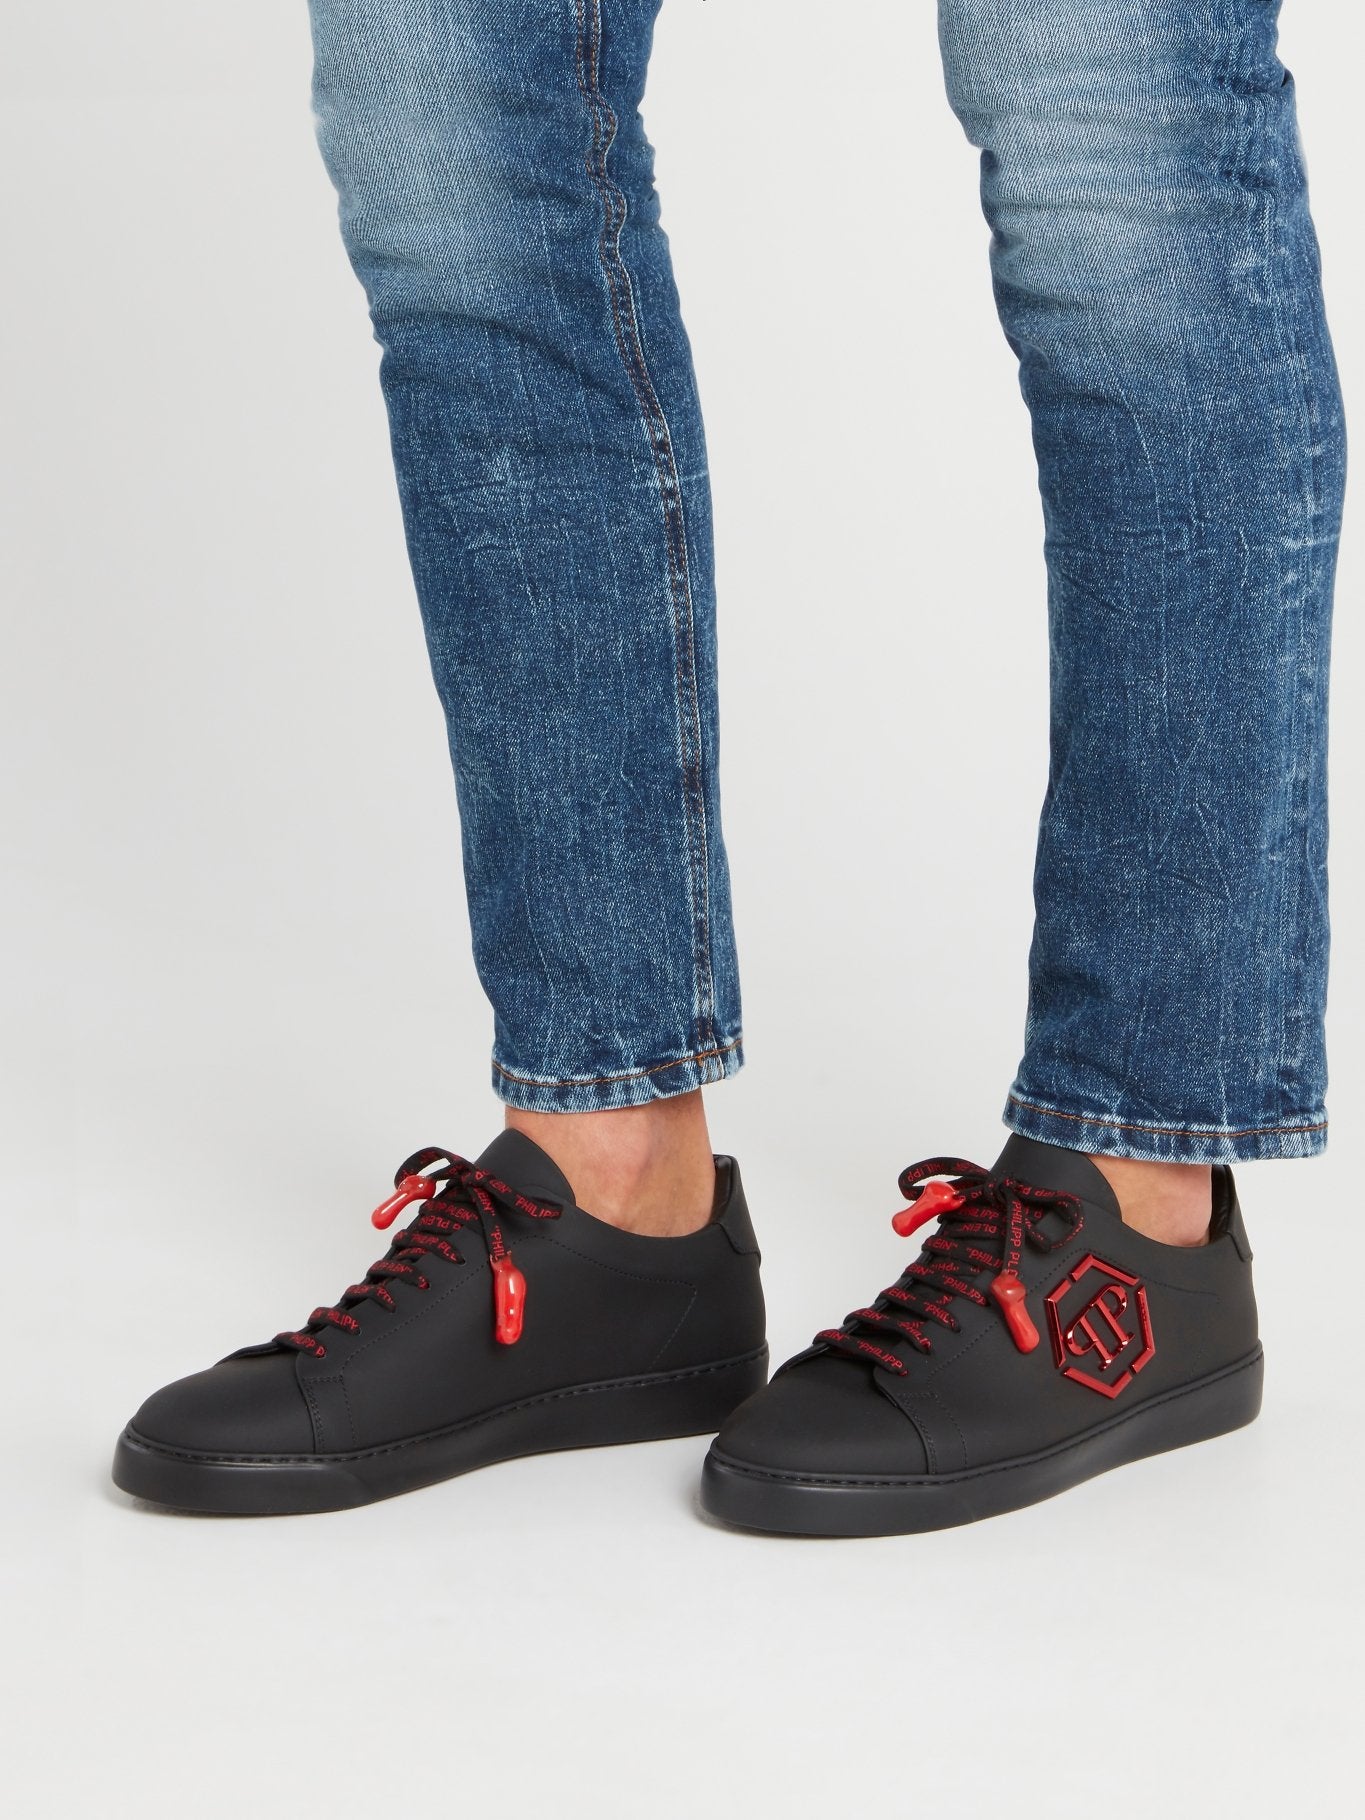 Black and Red Low Top Sneakers